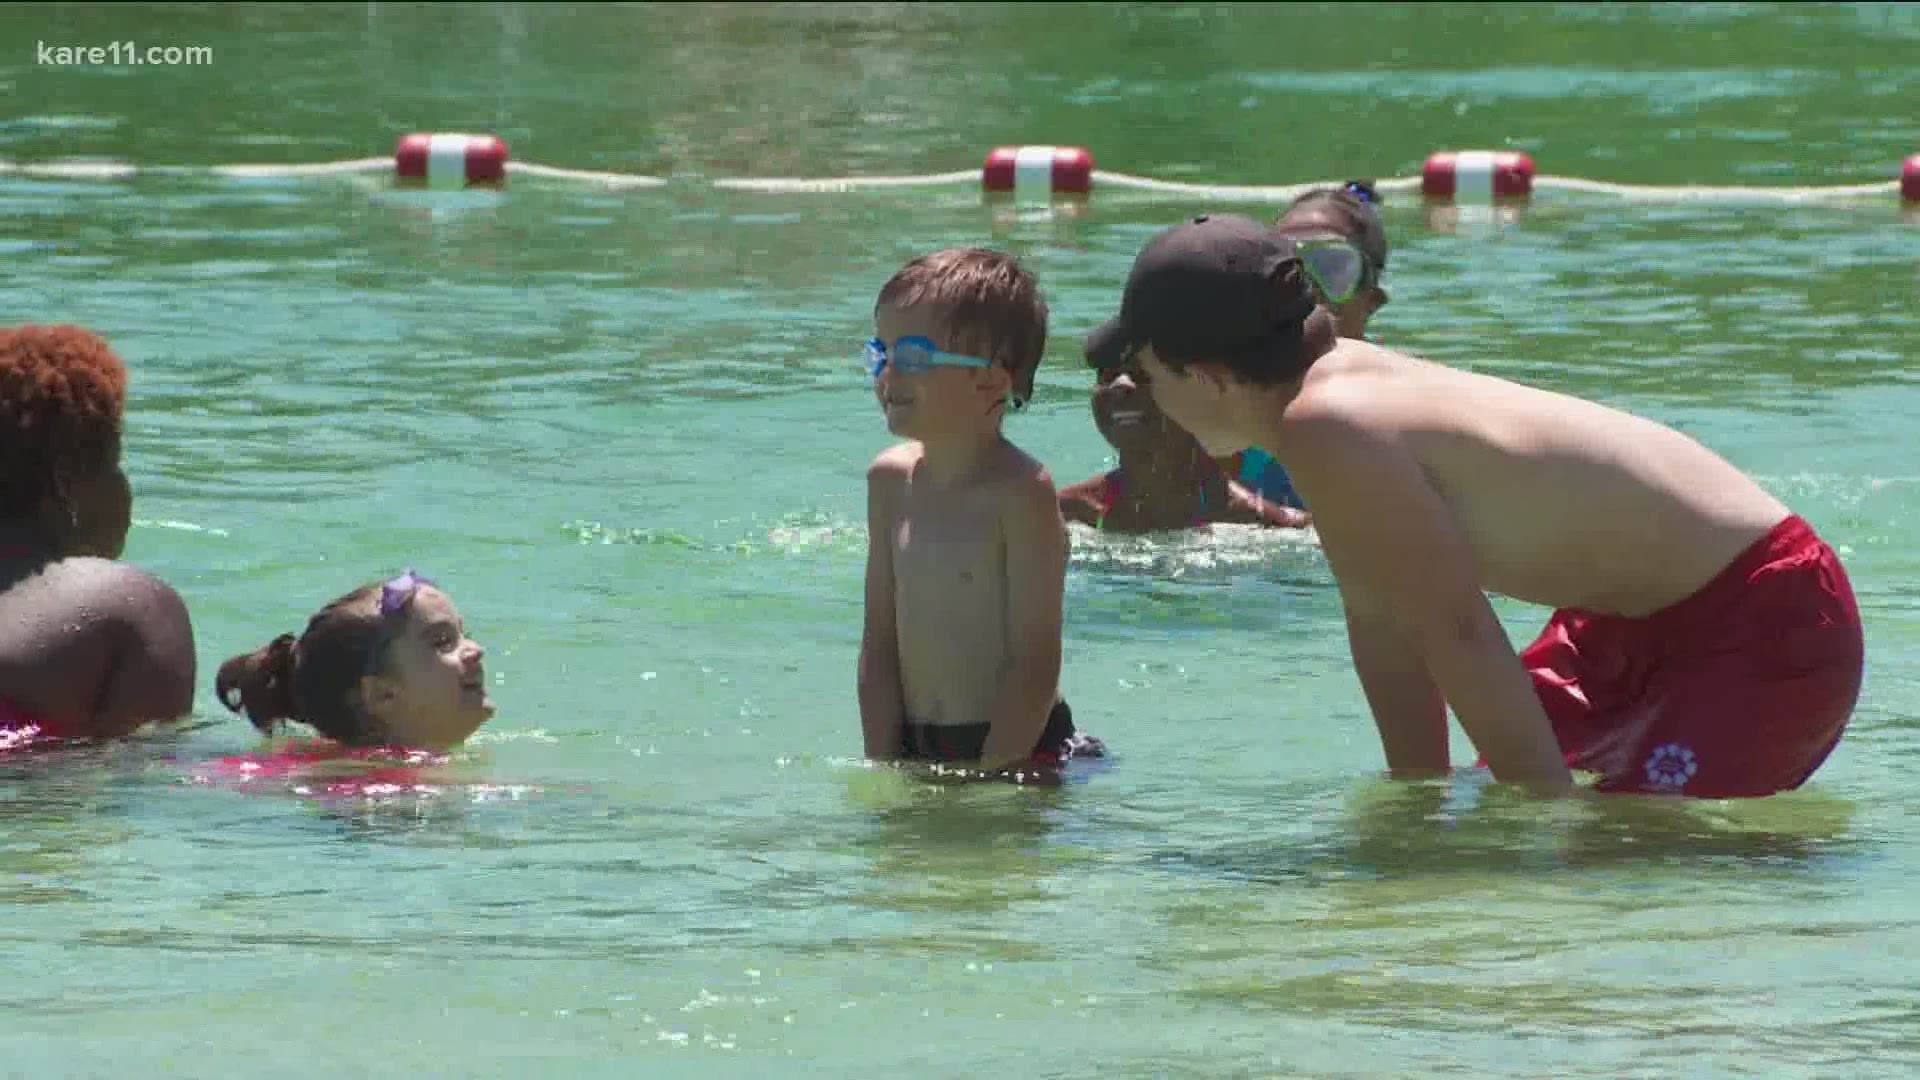 After a year with very few swimming lessons, parents are rushing to get their kids caught up heading into the summer